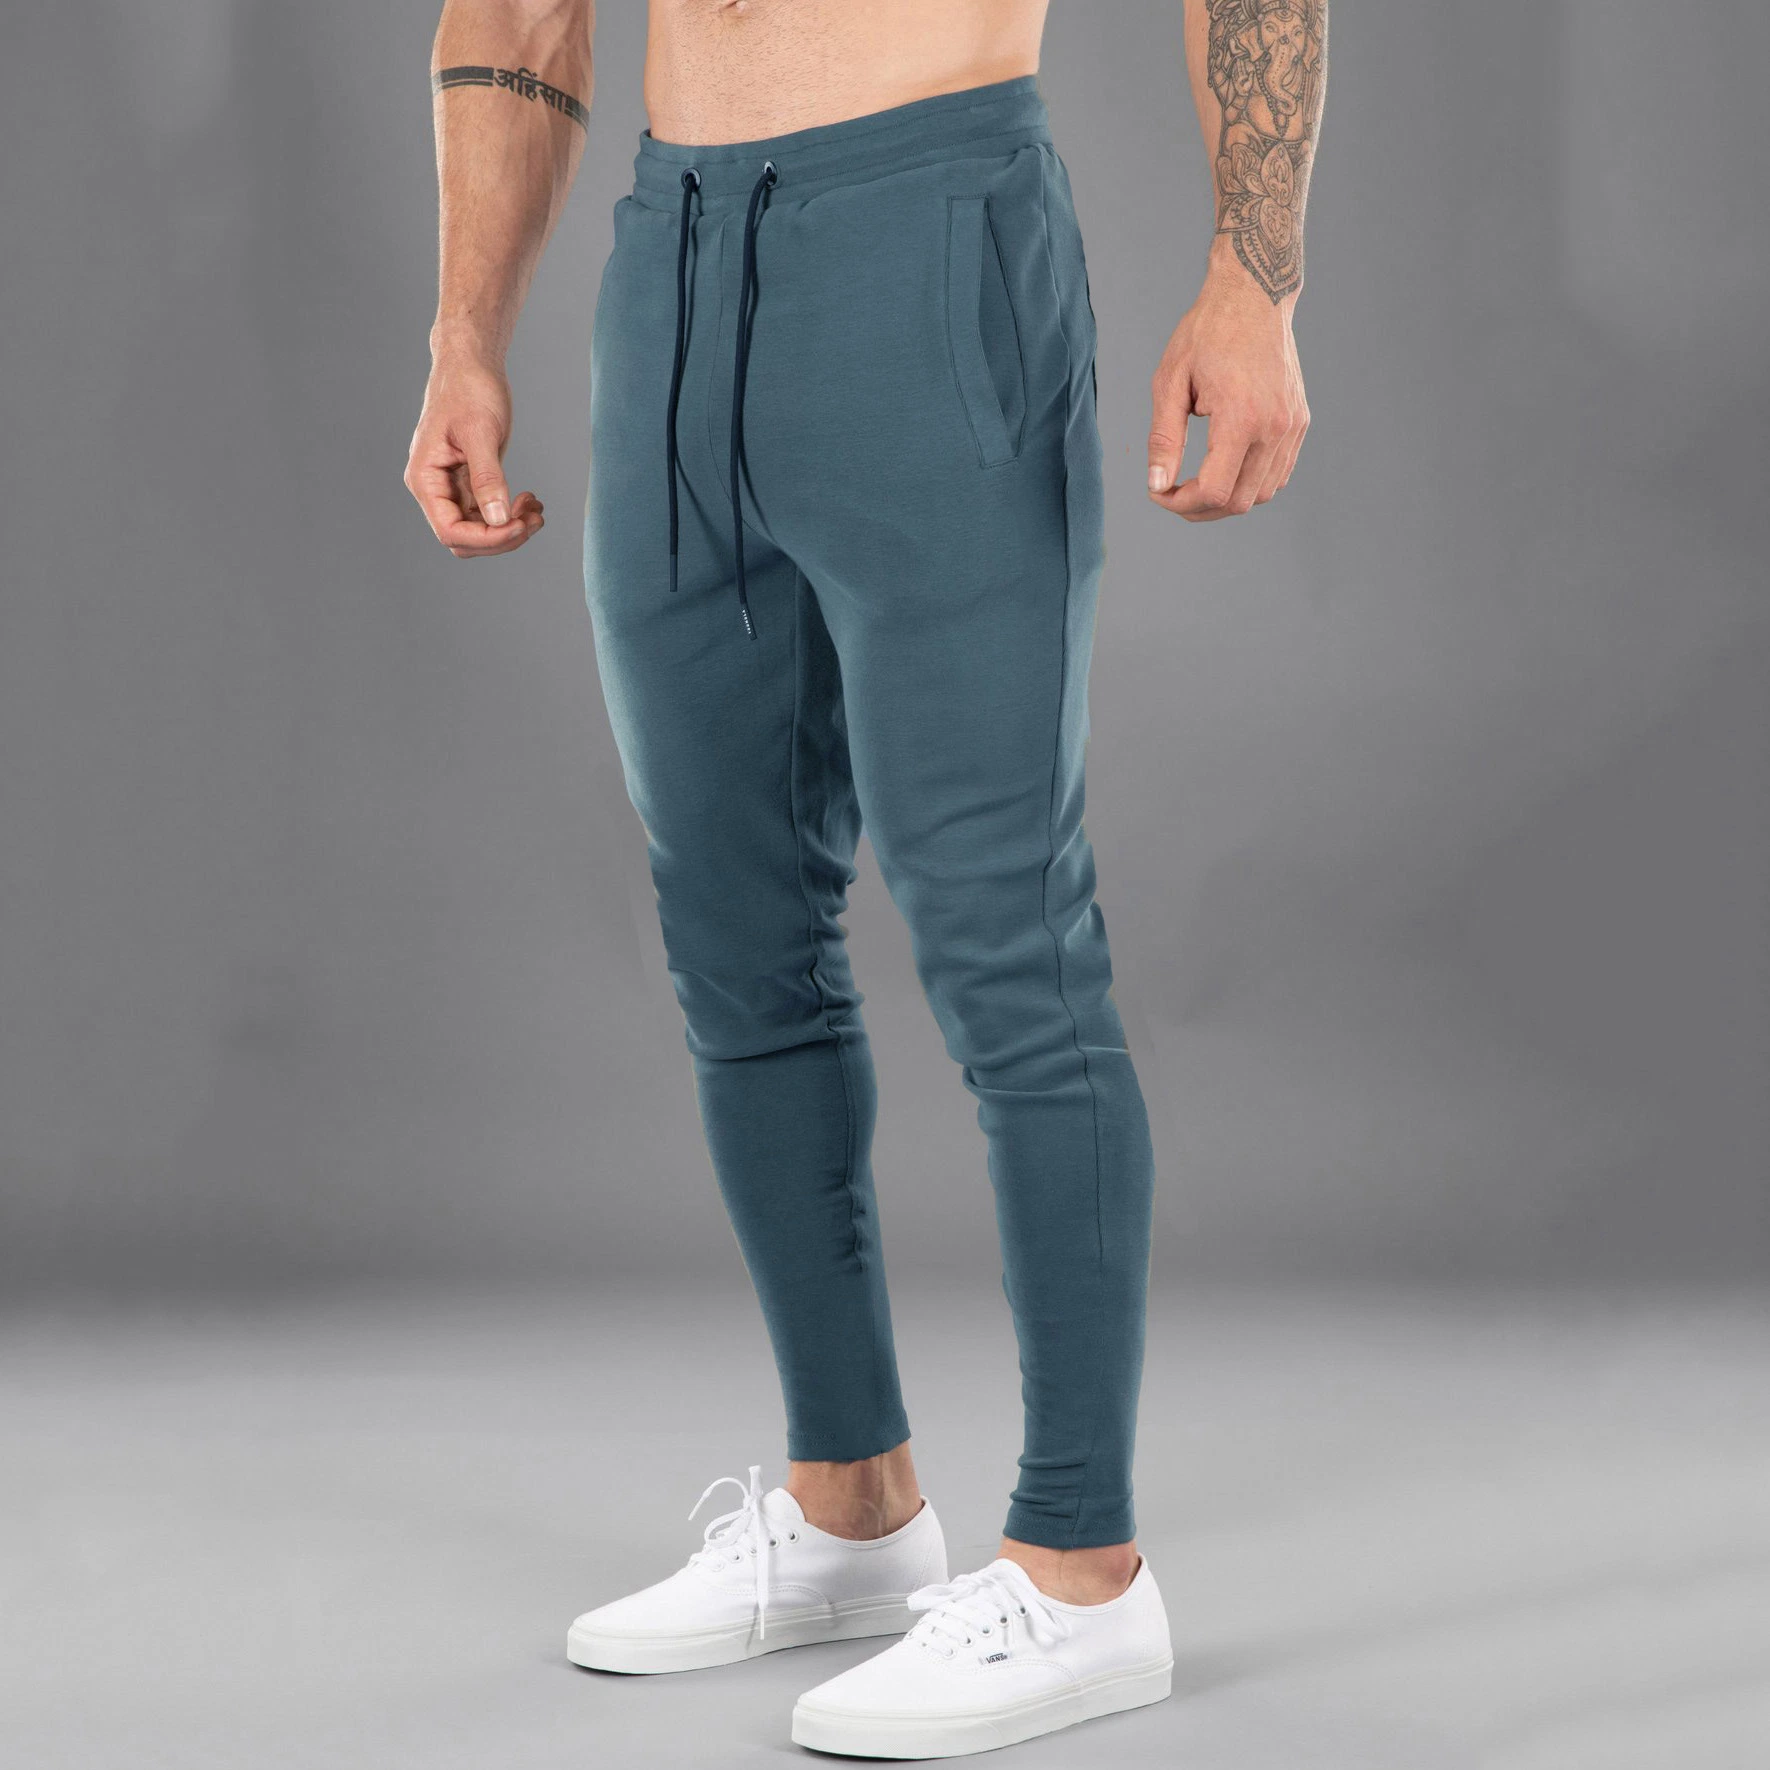 Spring and Autumn New Male Sports Casual Sweatpants Running Exercise Cotton Slim Elastic Small Feet Pants